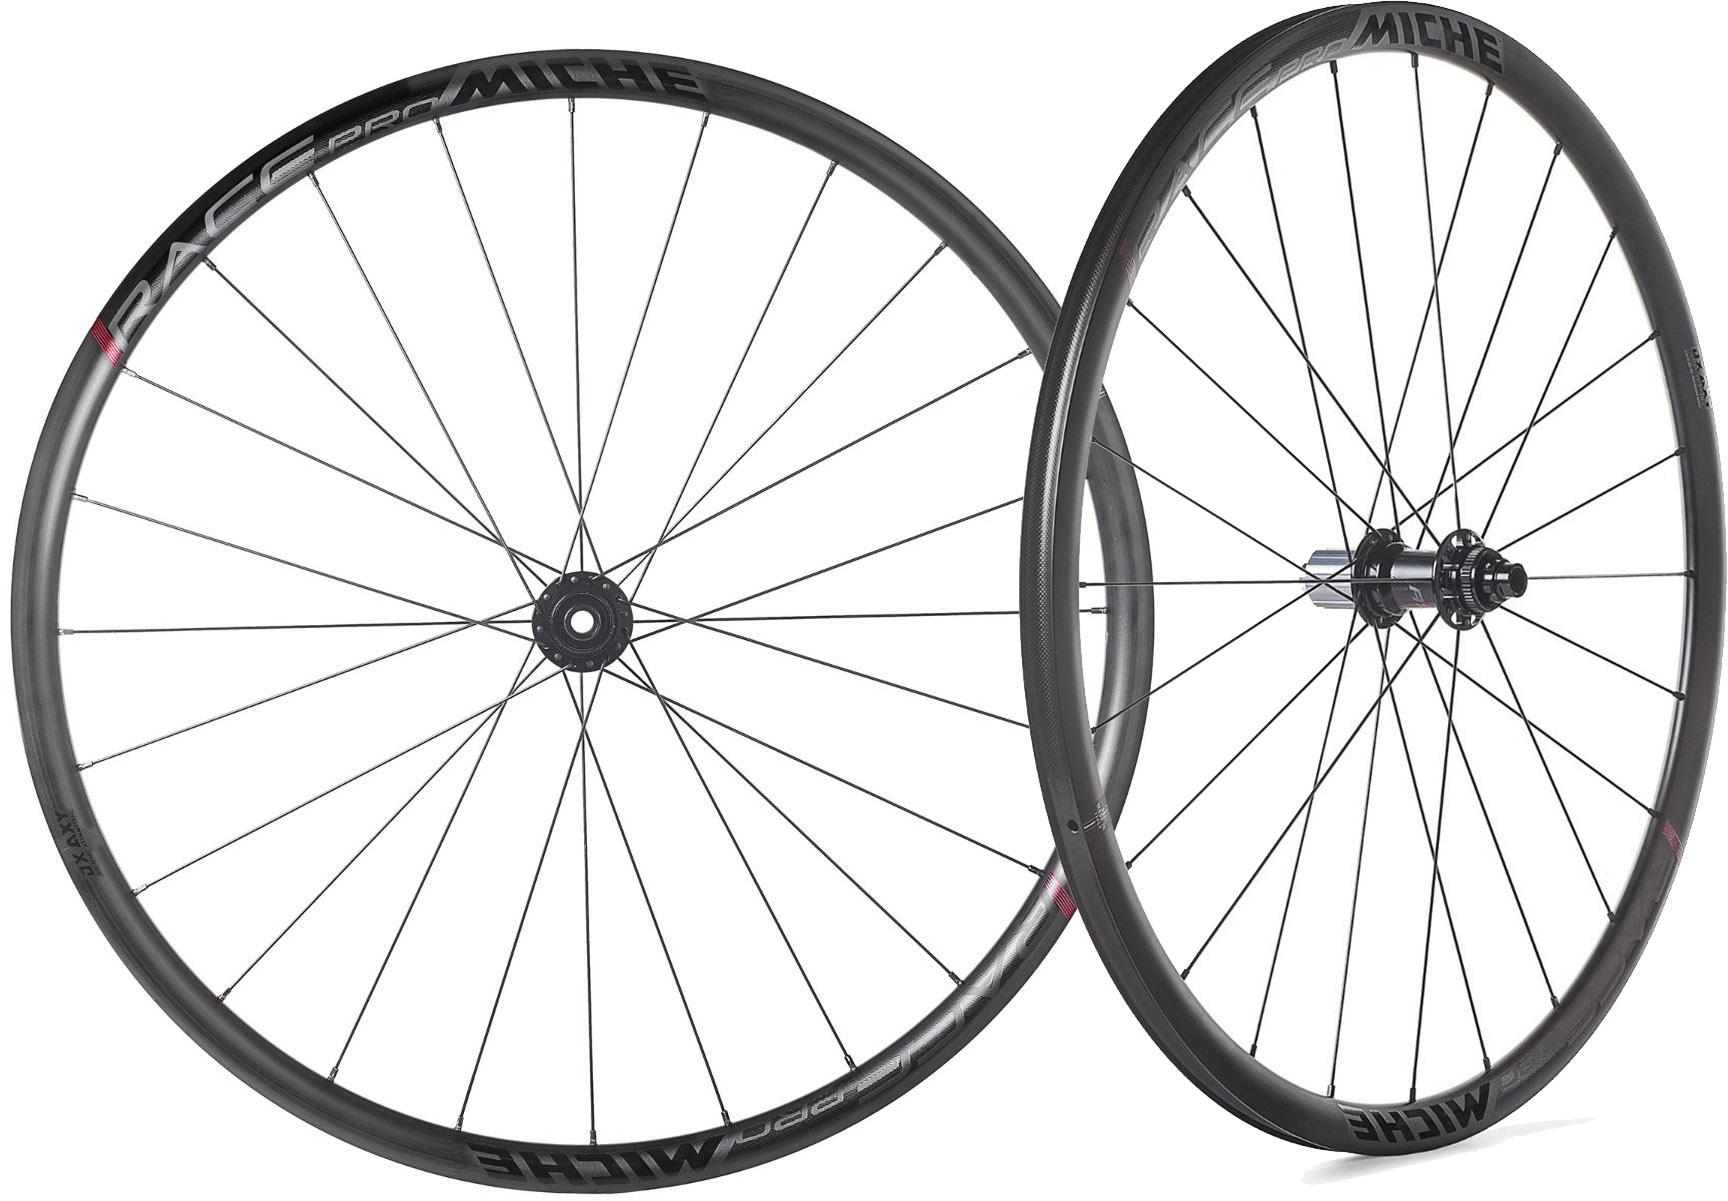 Miche Race AXY-WP DX Disc Road Wheelset | cycling wheel